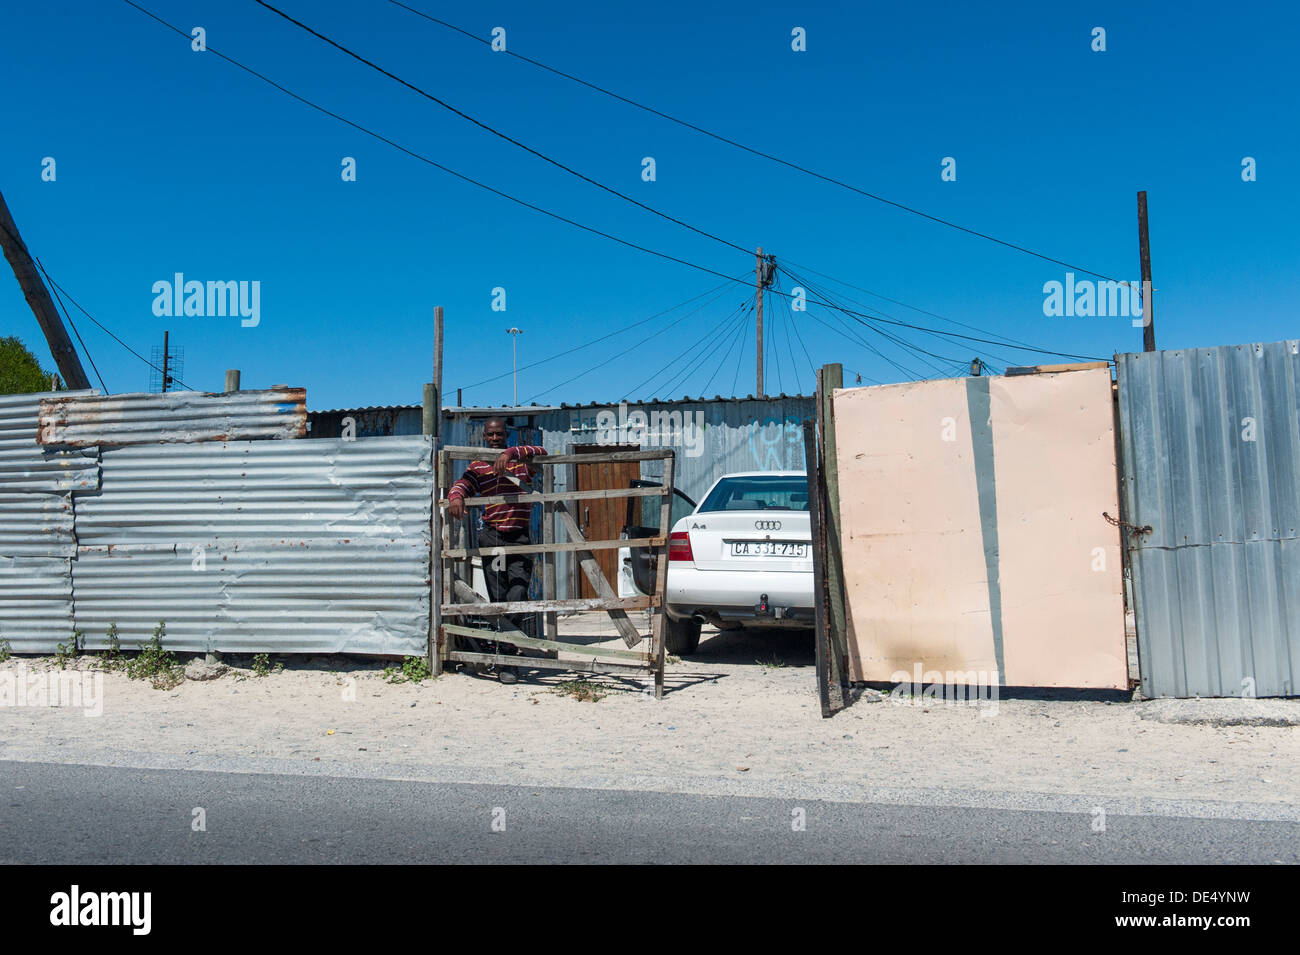 Car owner and parked car in front of a tin shack in Khayelitsha, Cape Town, South Africa Stock Photo